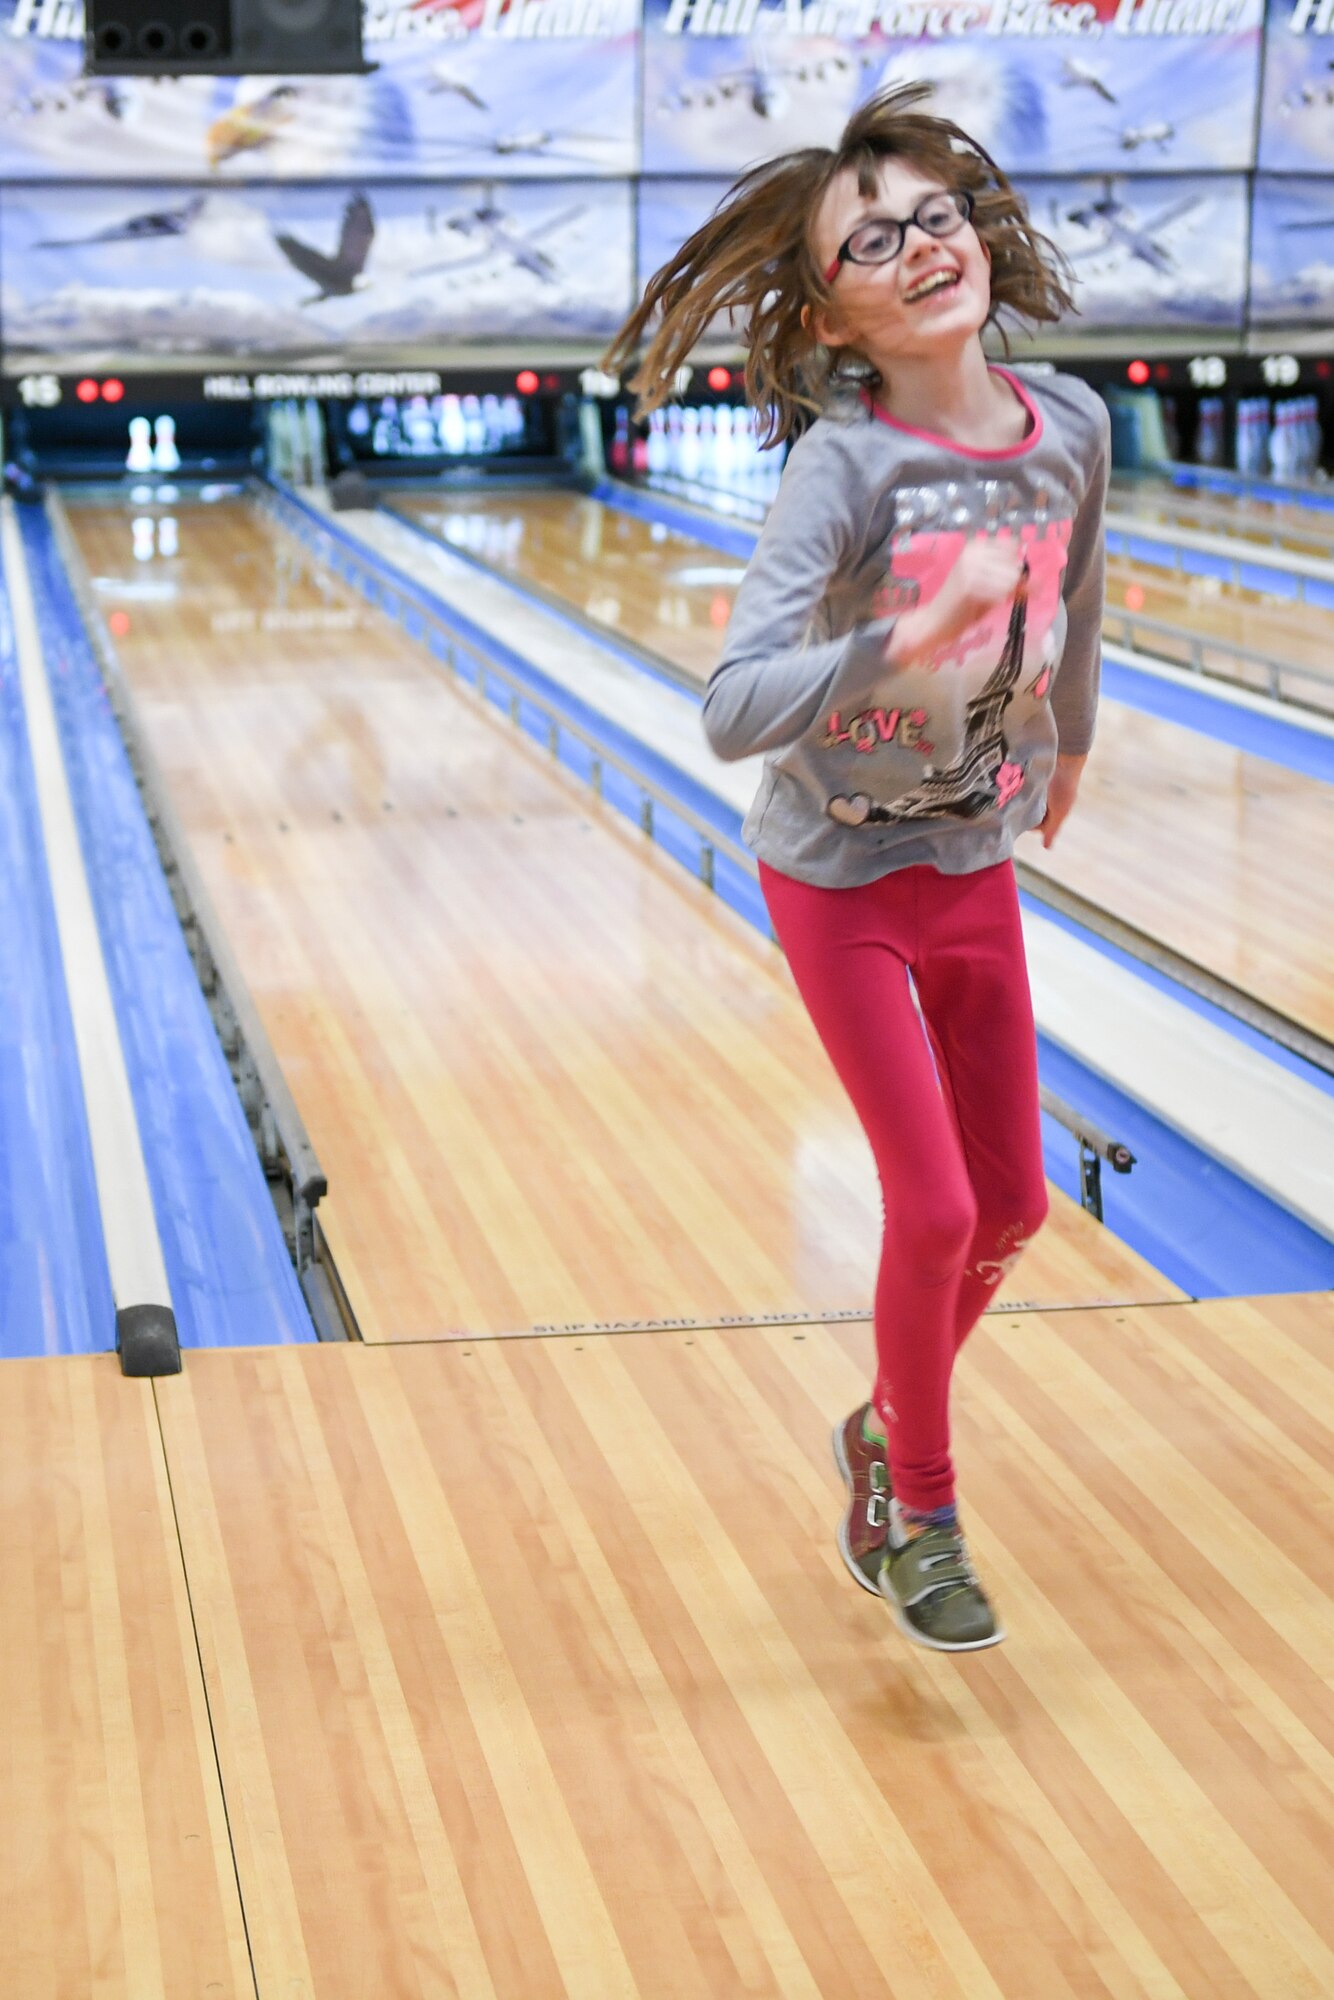 Hailey Cook jumps while bowling Jan. 30, 2019, at the event held by Exceptional Family Member Program-Family Support at Hill Air Force Base, Utah. (U.S. Air Force photo by Cynthia Griggs)